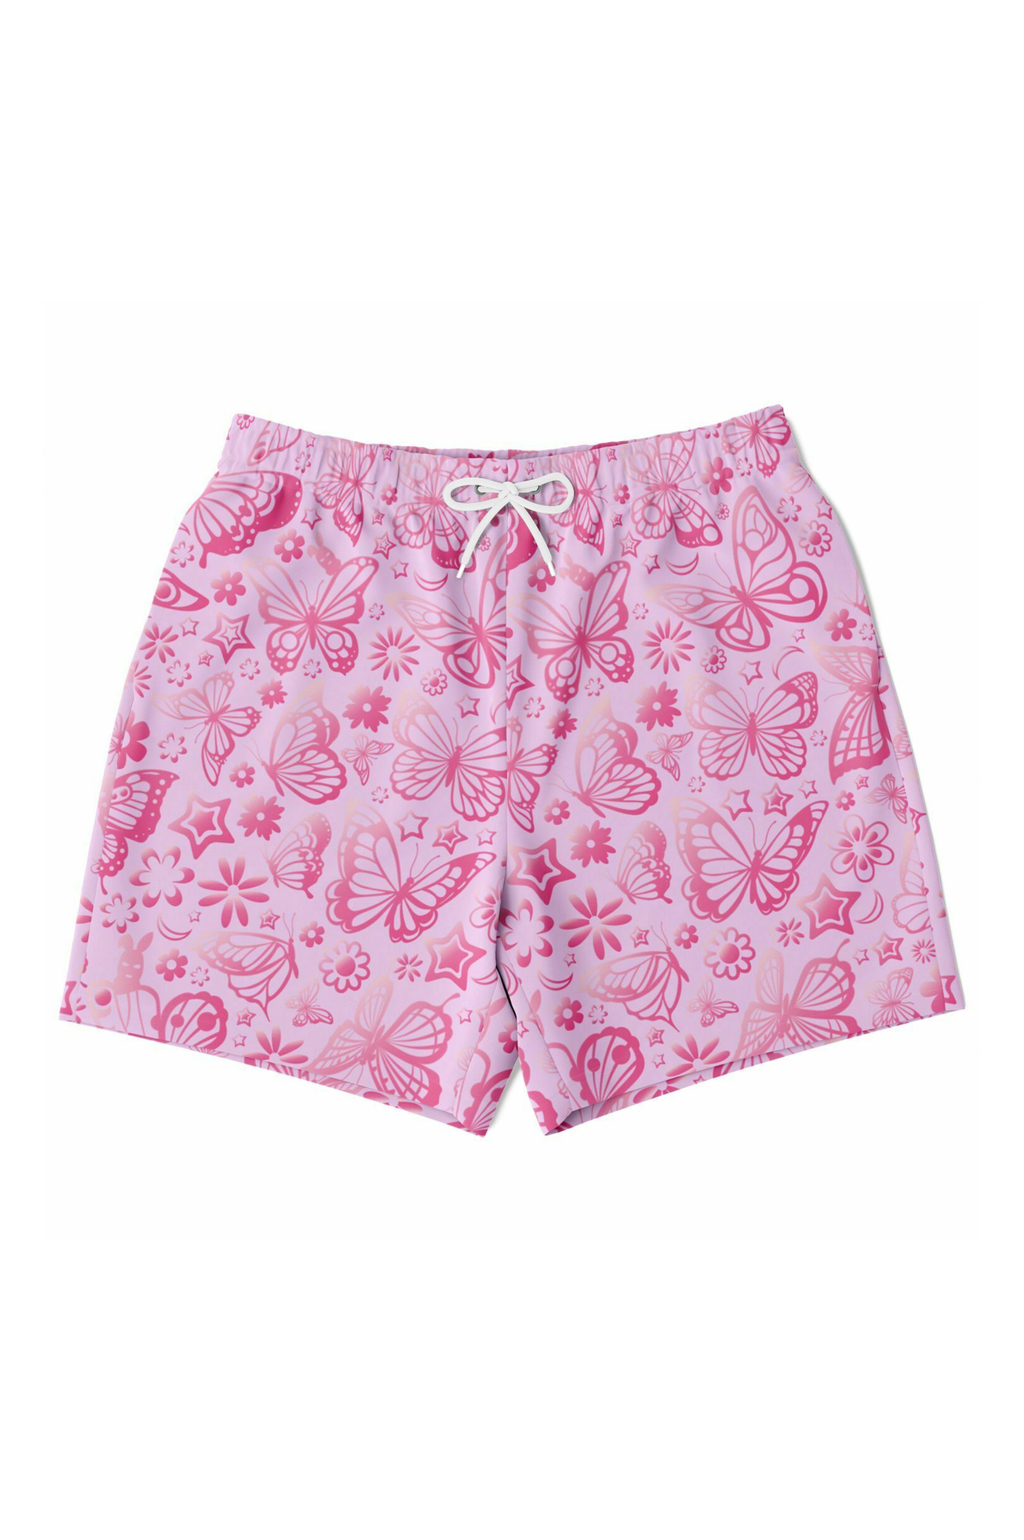 Electric Eden Unisex Shorts (Made to Order) - Dollhouse Diva